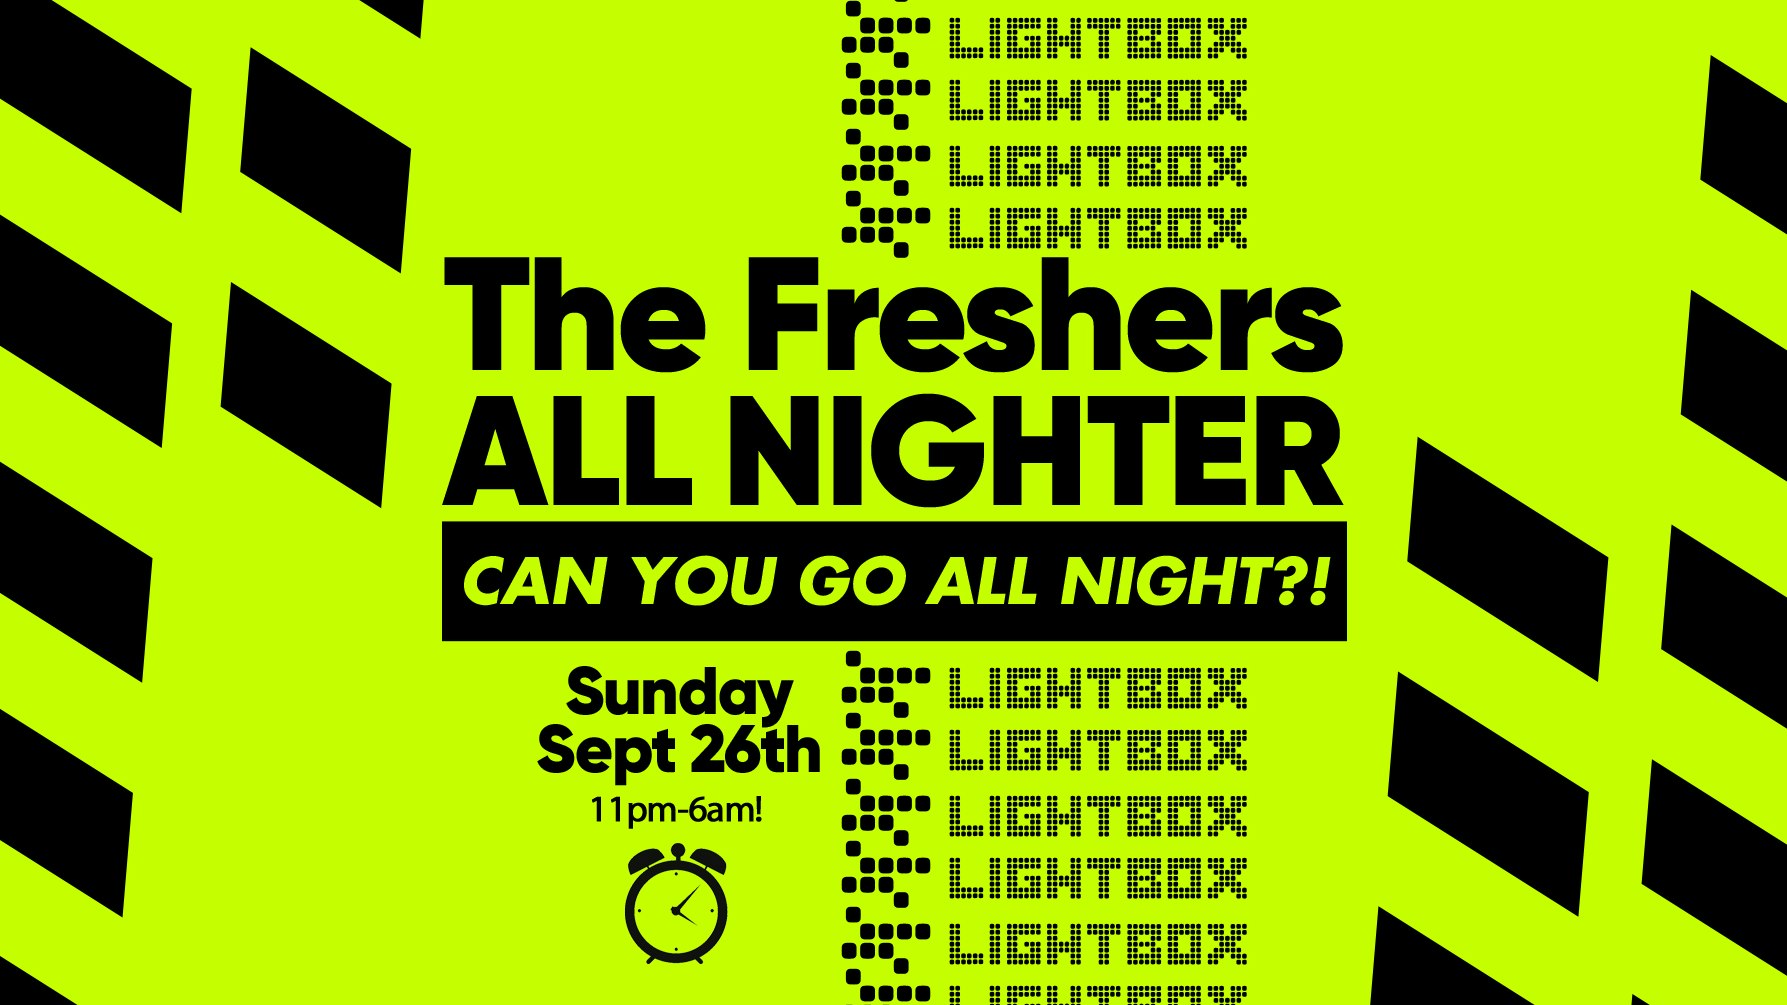 The Freshers ALL NIGHTER ⏰😵| Till 6AM At Lightbox  🚨